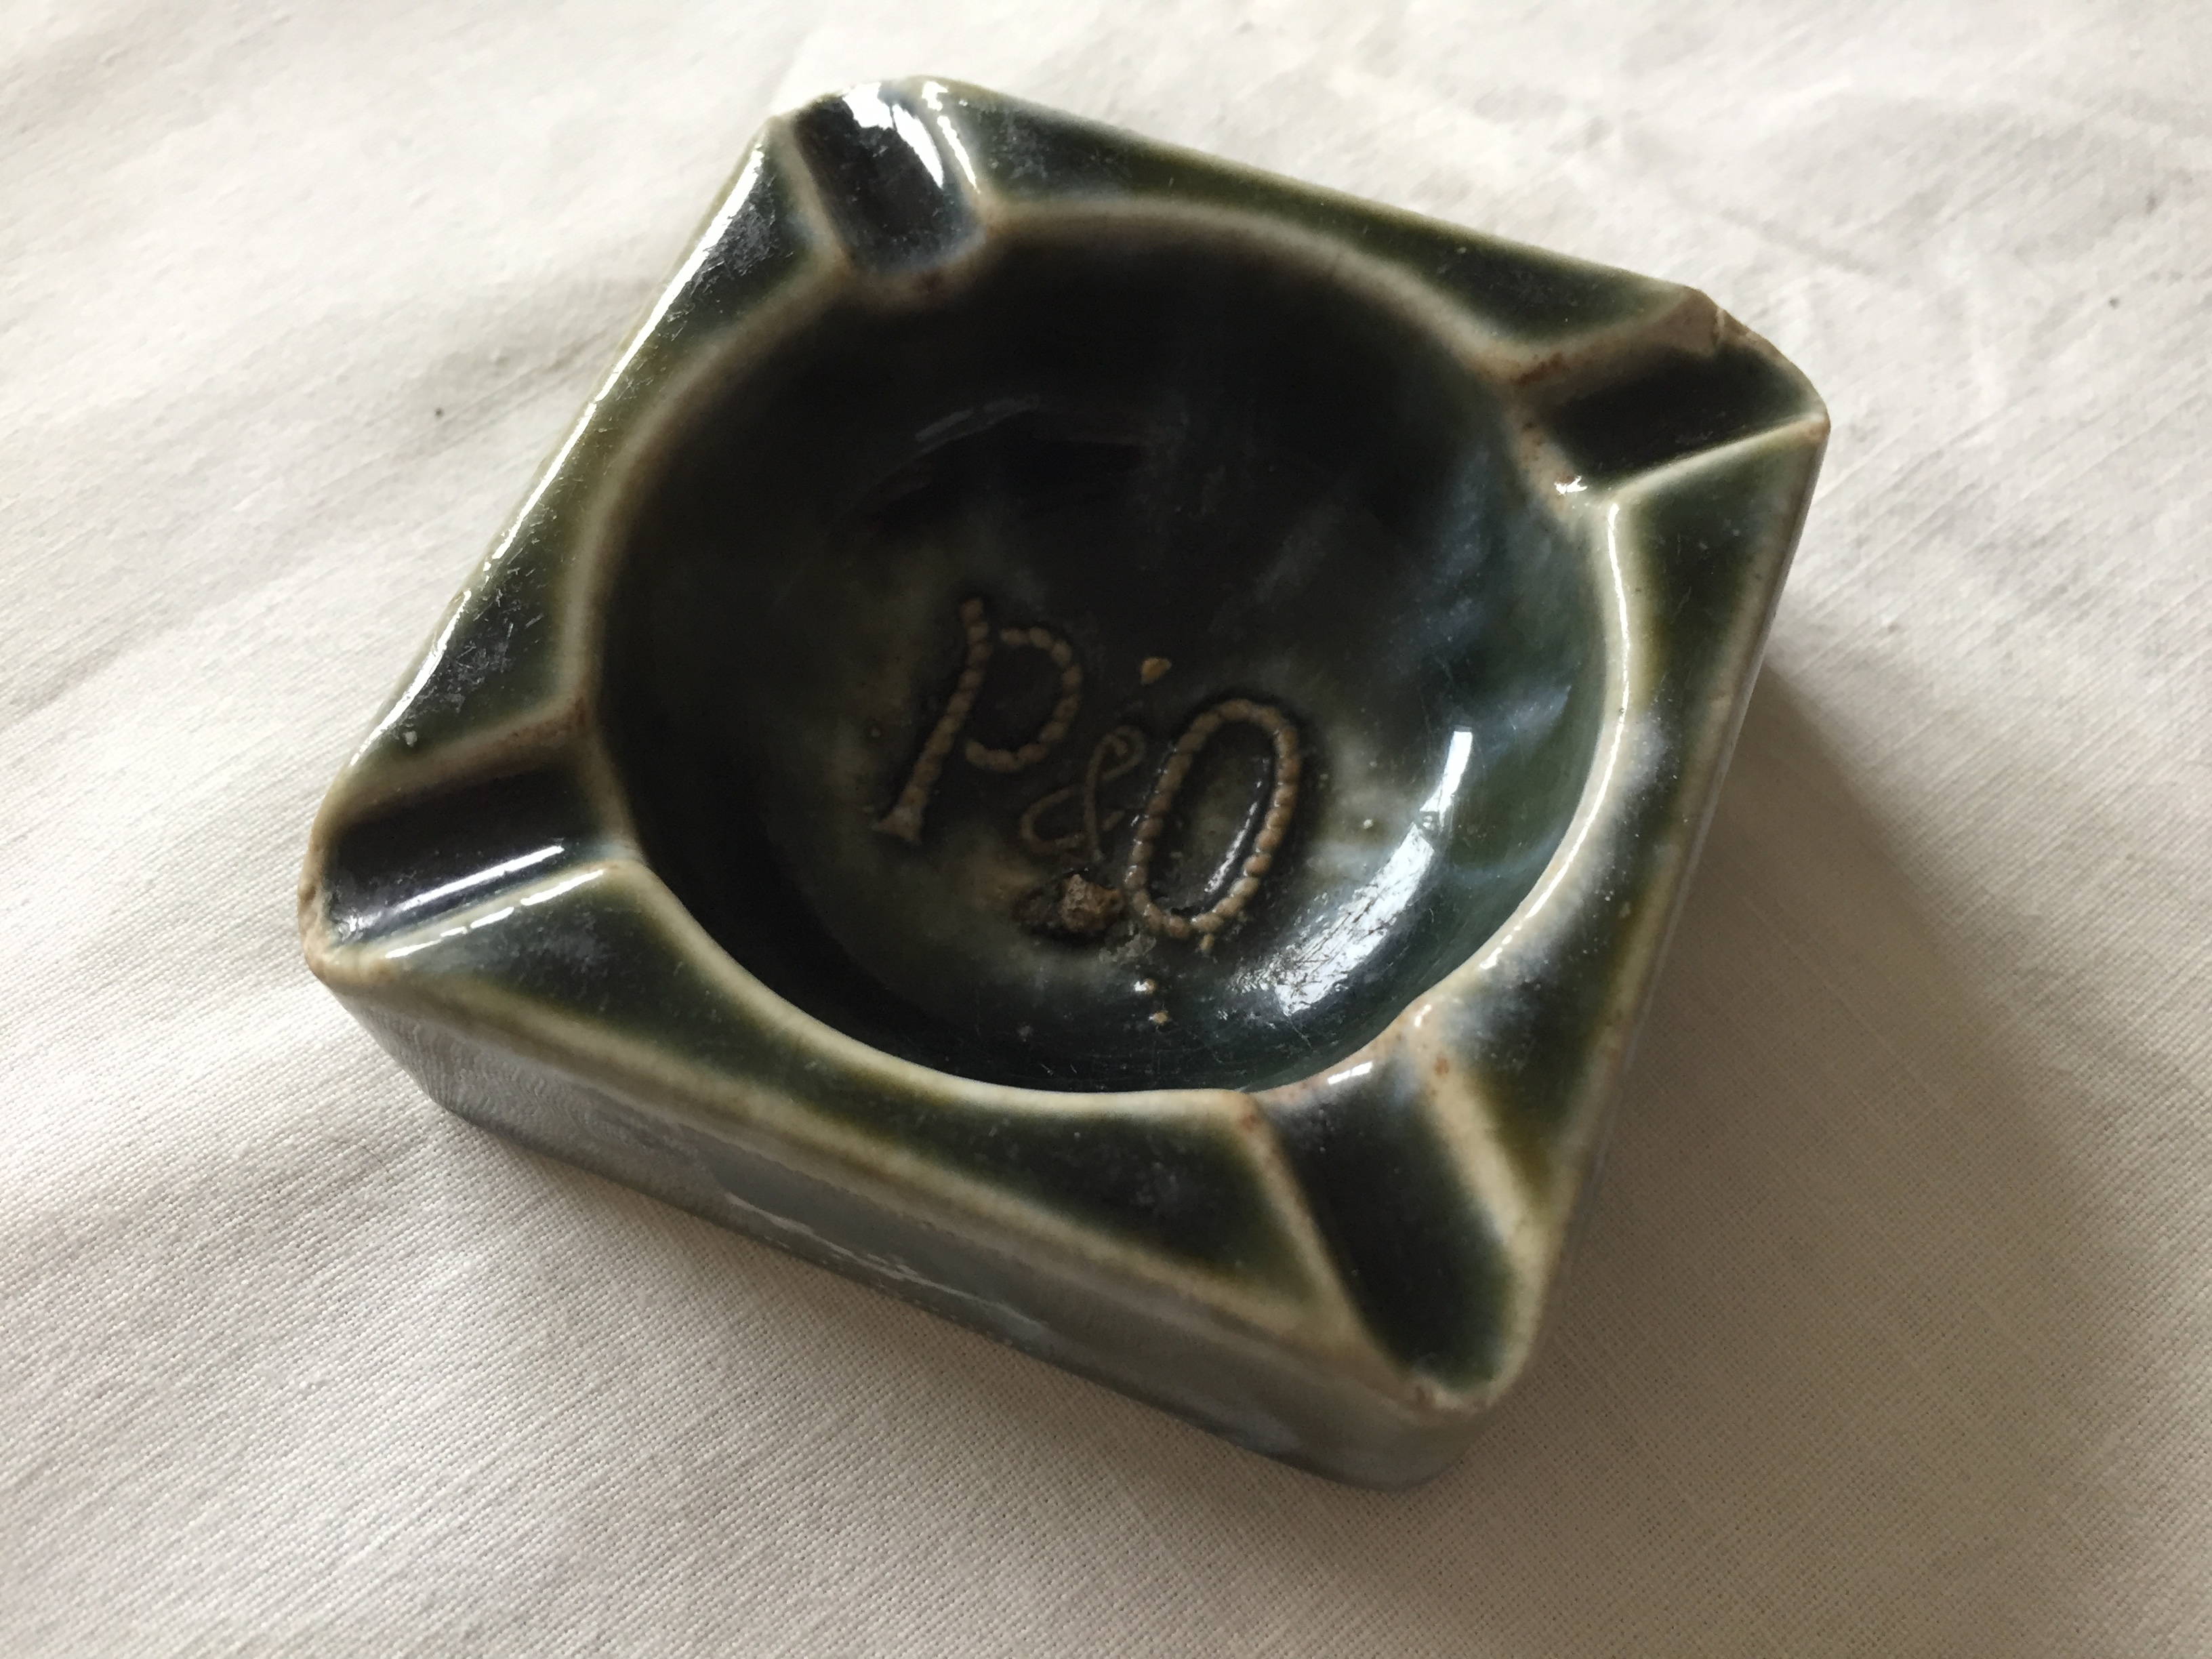 VERY EARLY STYLE AS USED ONBOARD GREEN MARBLE ASHTRAY FROM THE P&O LINE